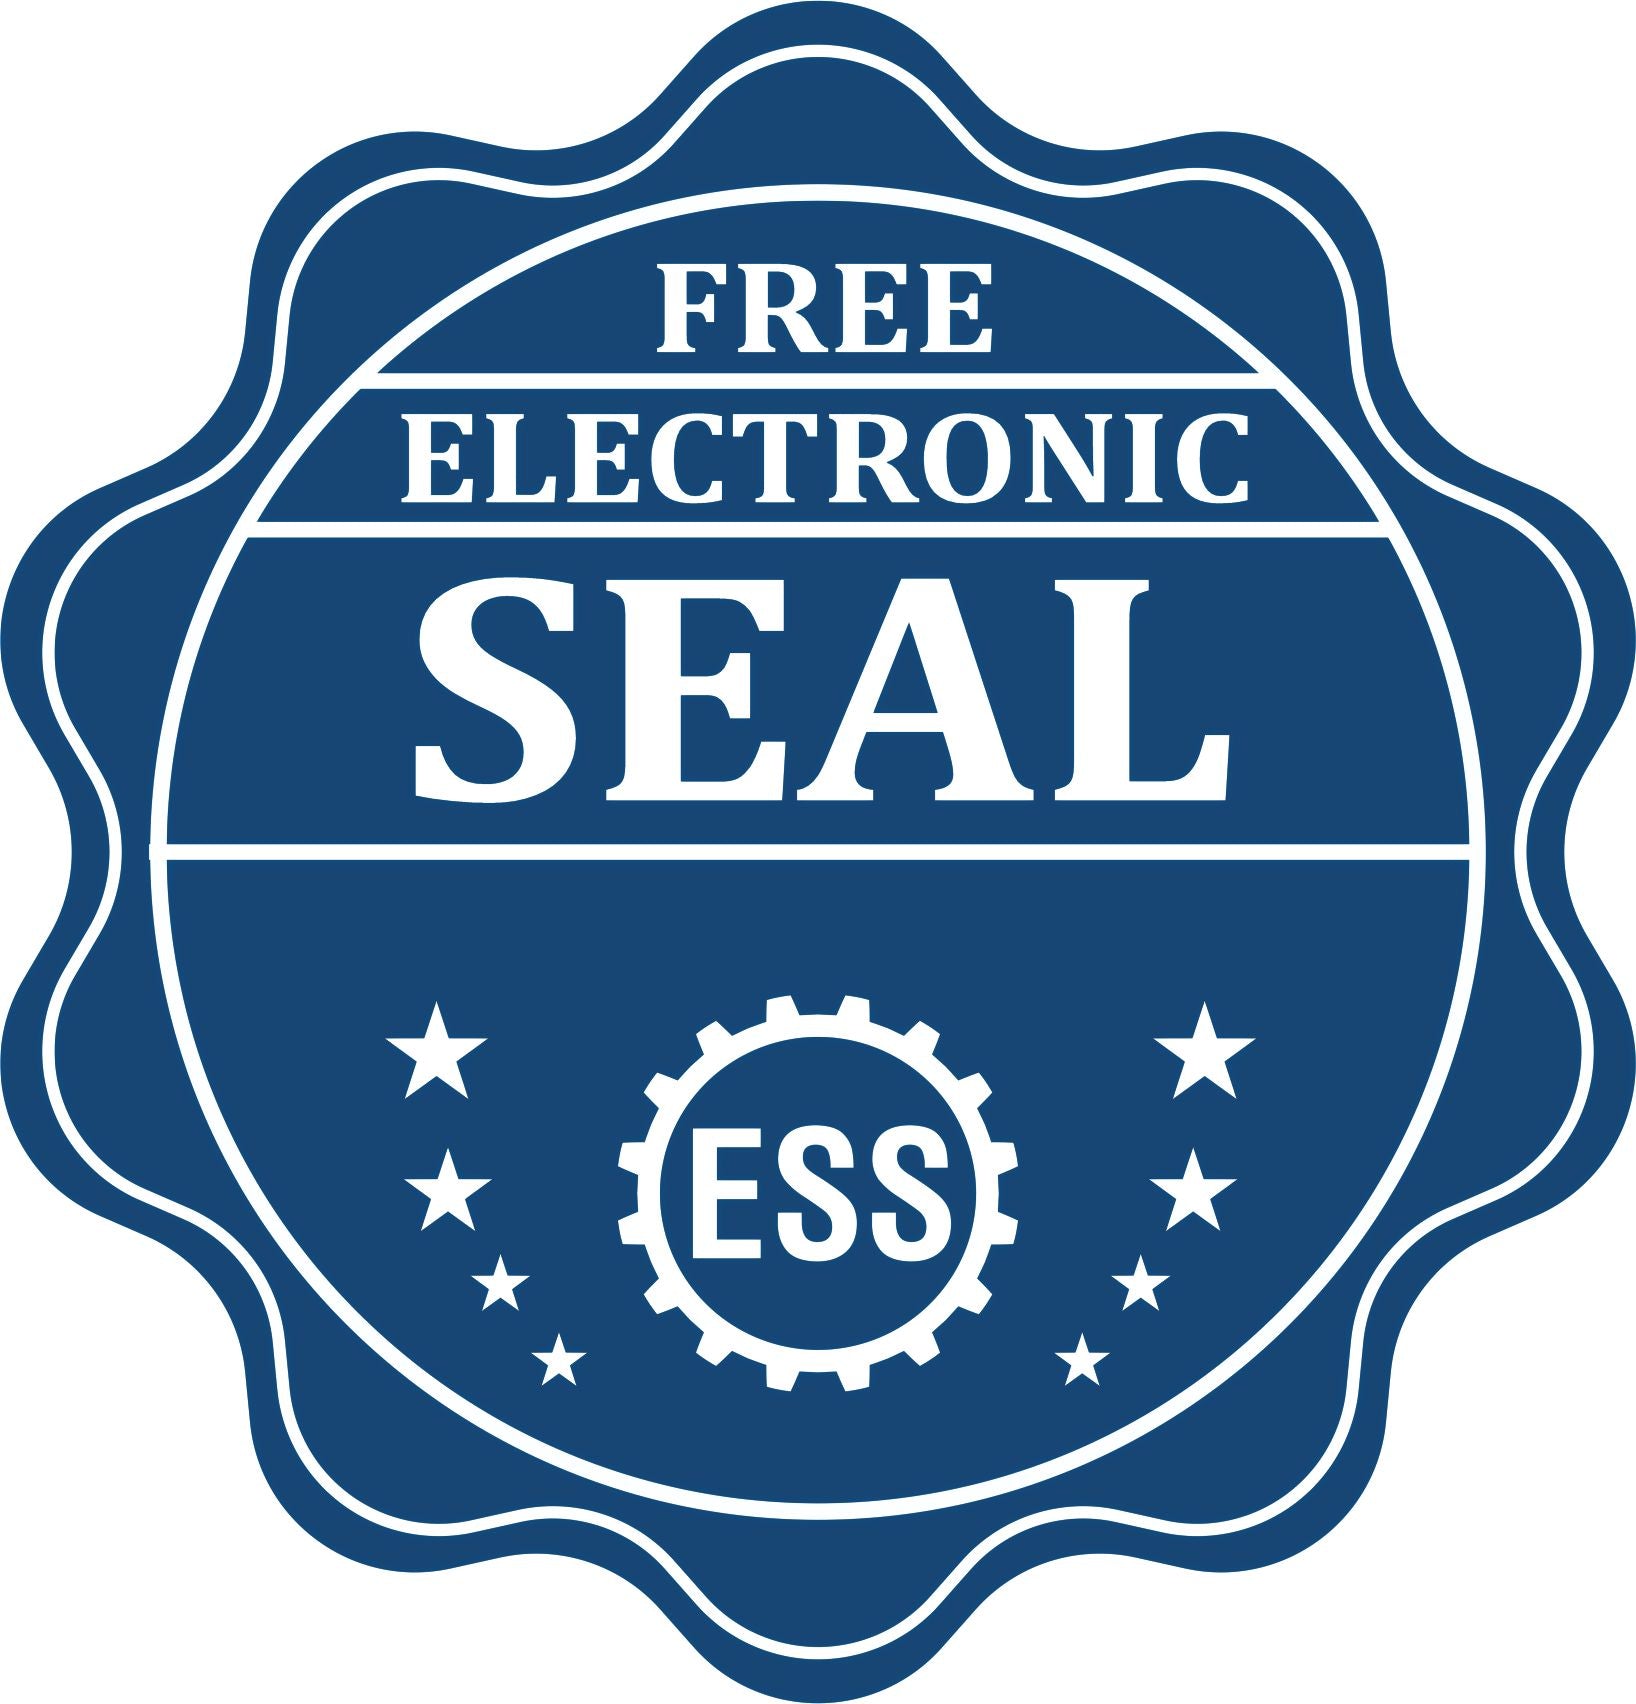 A badge showing a free electronic seal for the Soft Maryland Professional Geologist Seal with stars and the ESS gear on the emblem.